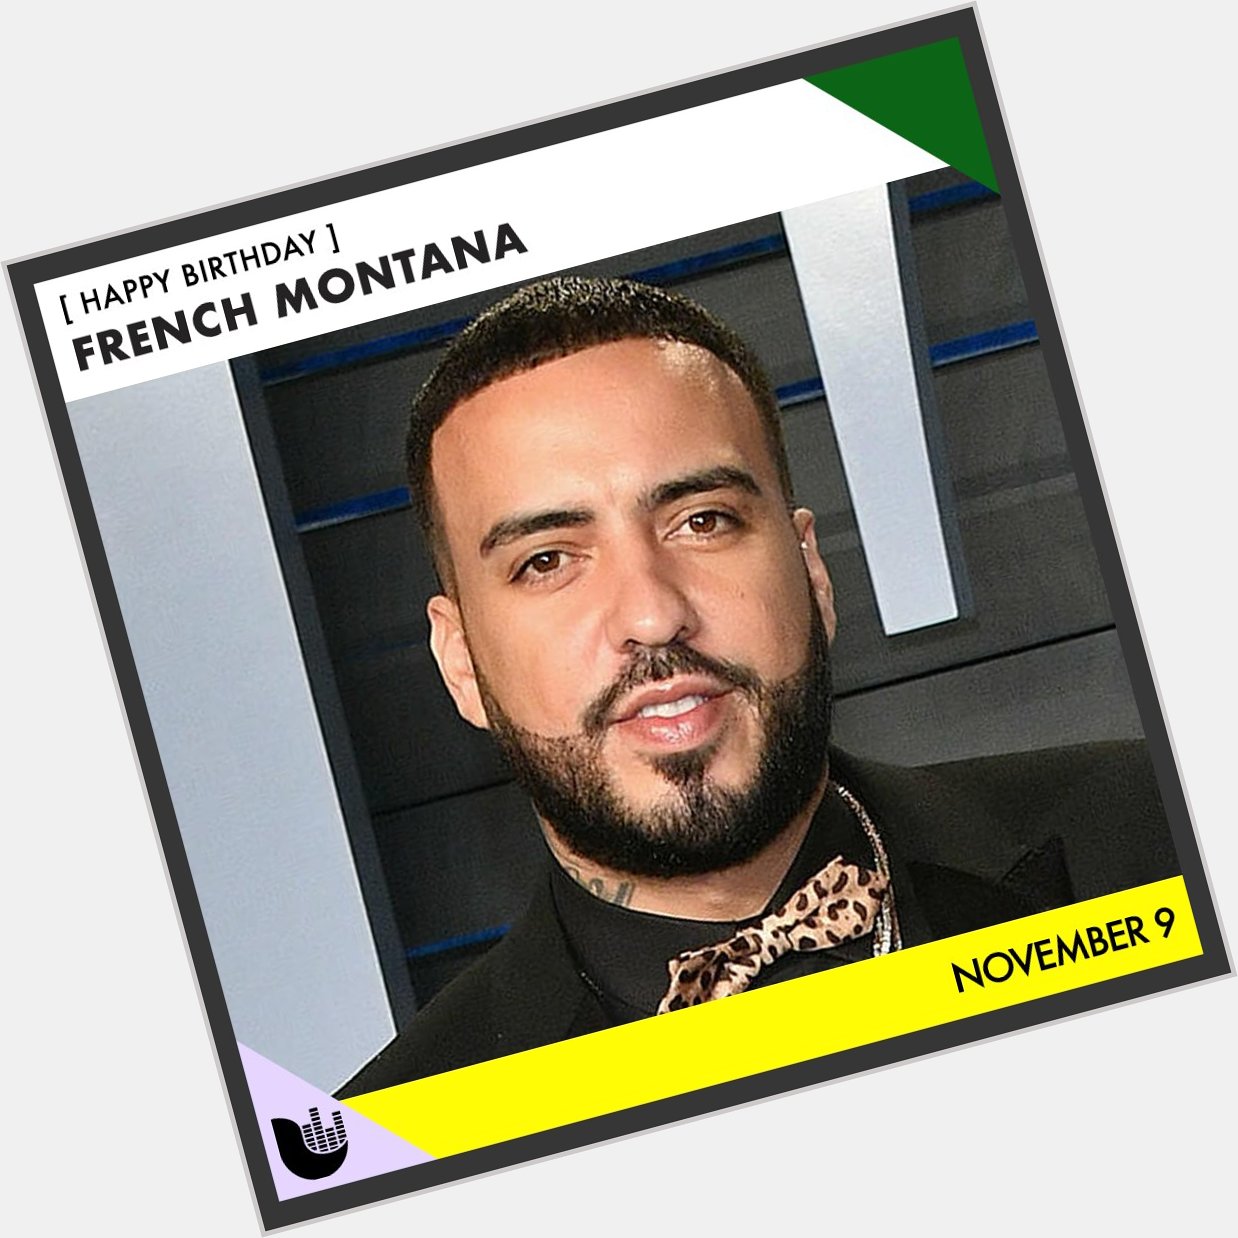 Join us in wishing French Montana a happy birthday! 